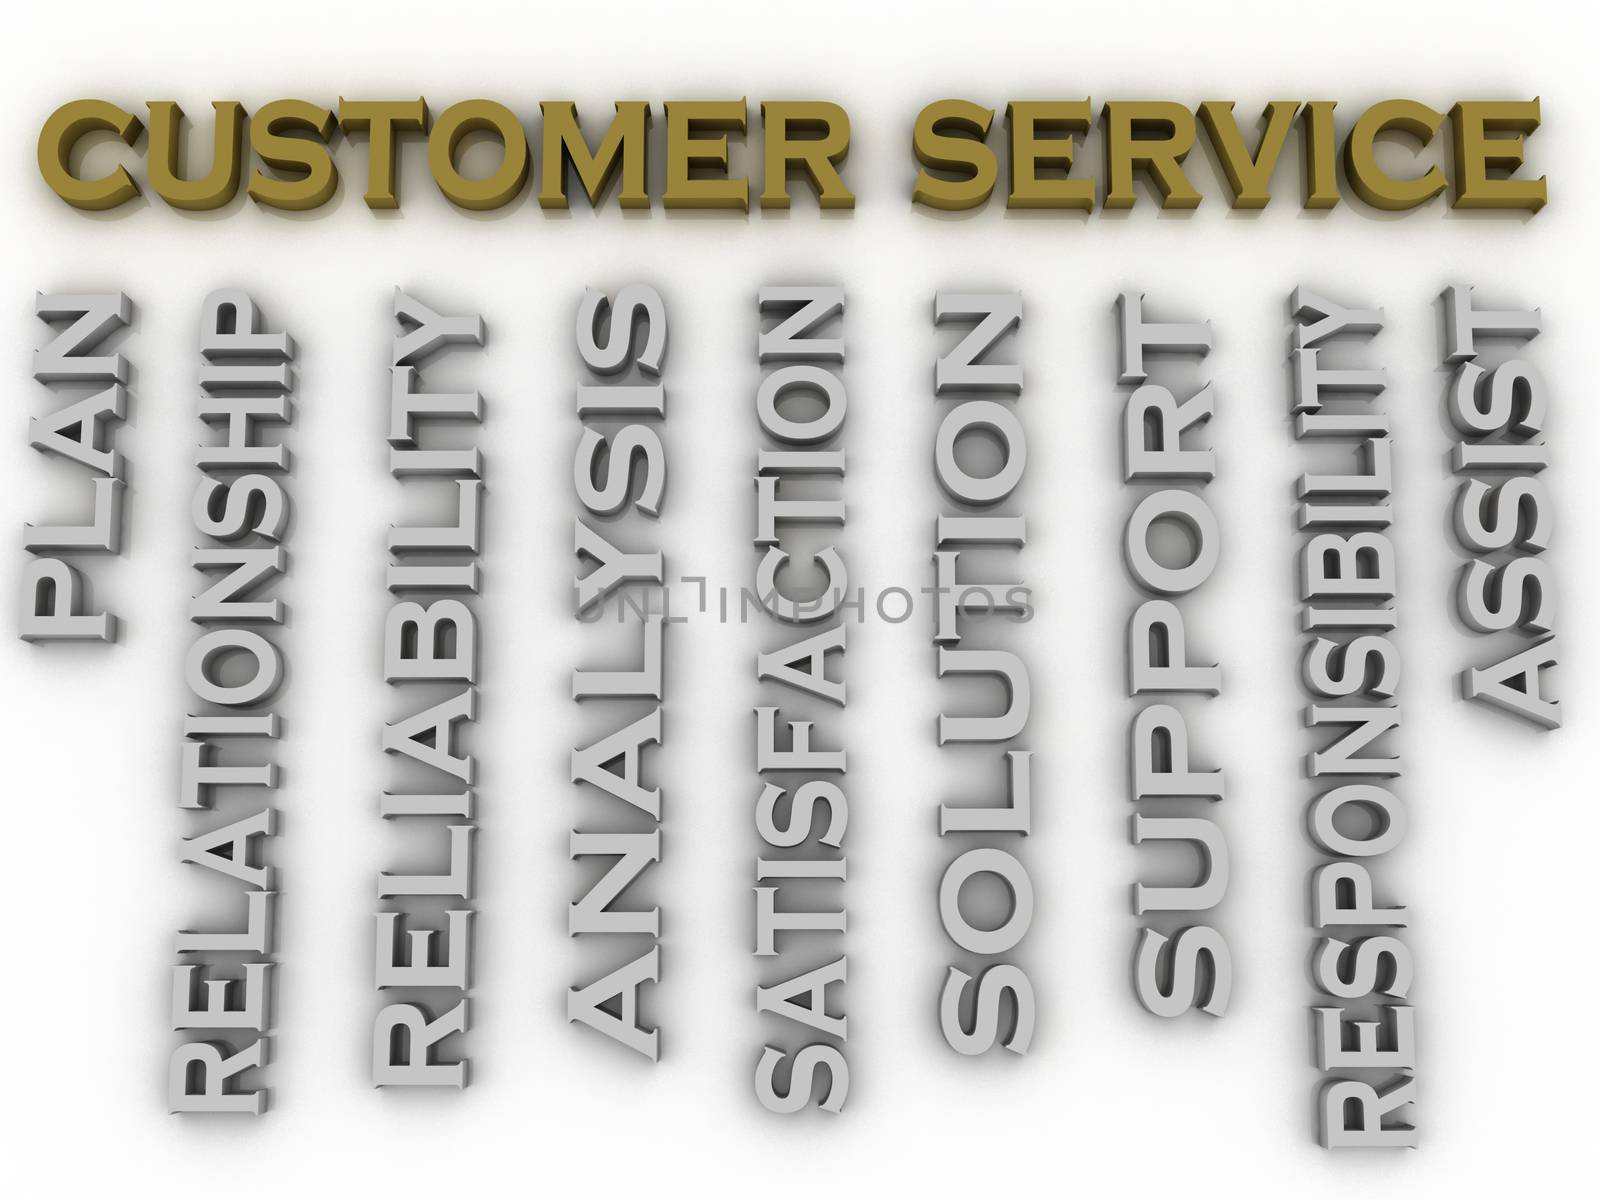 3d image customer service issues concept word cloud background by dacasdo